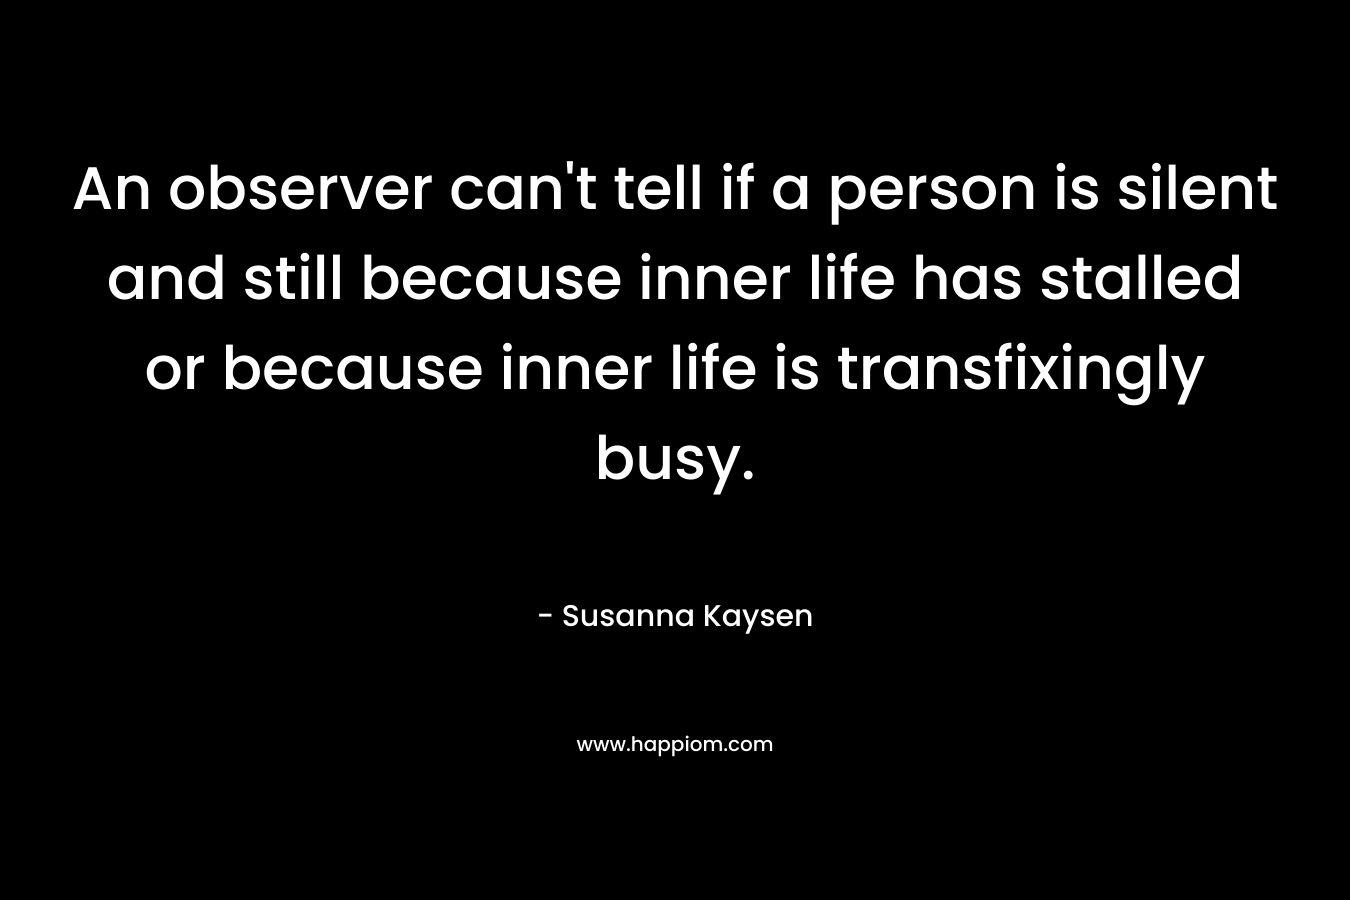 An observer can't tell if a person is silent and still because inner life has stalled or because inner life is transfixingly busy.